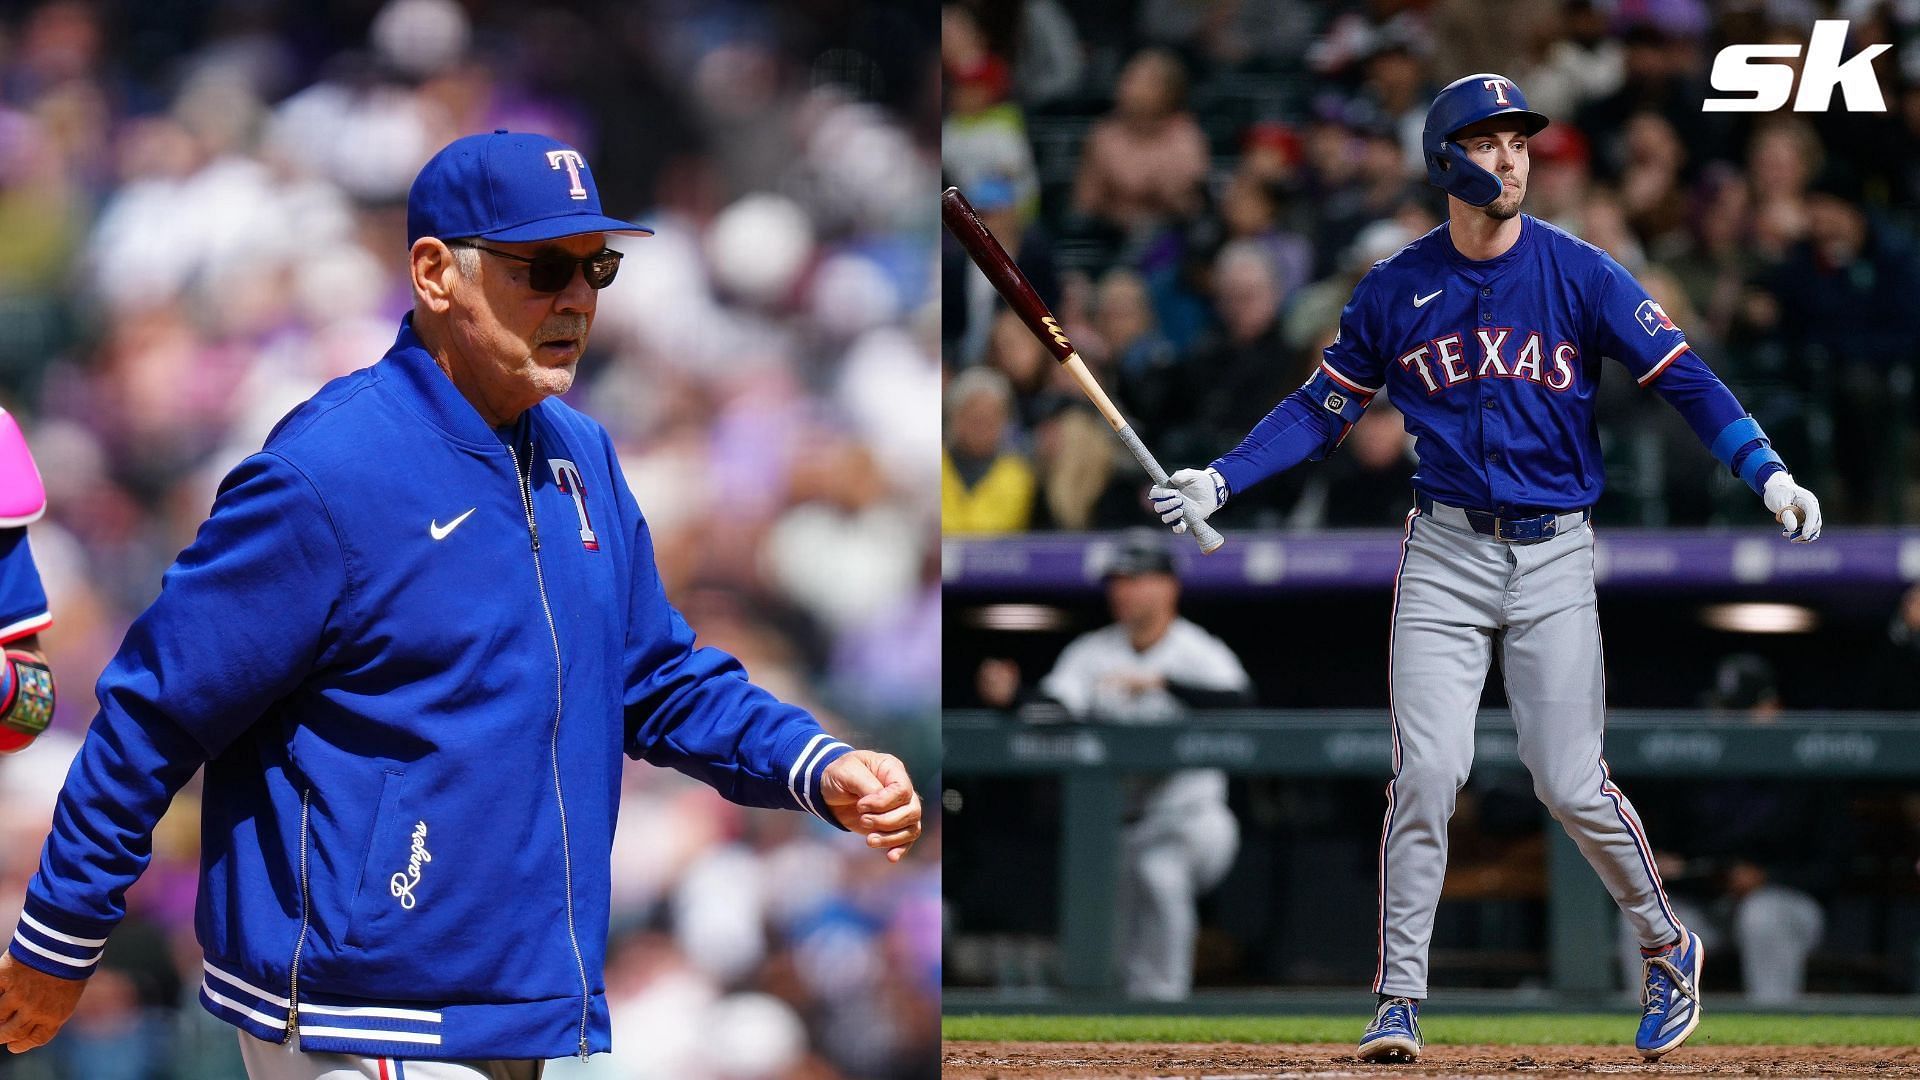 Texas Rangers manager Bruce Bochy believes that Evan Carter